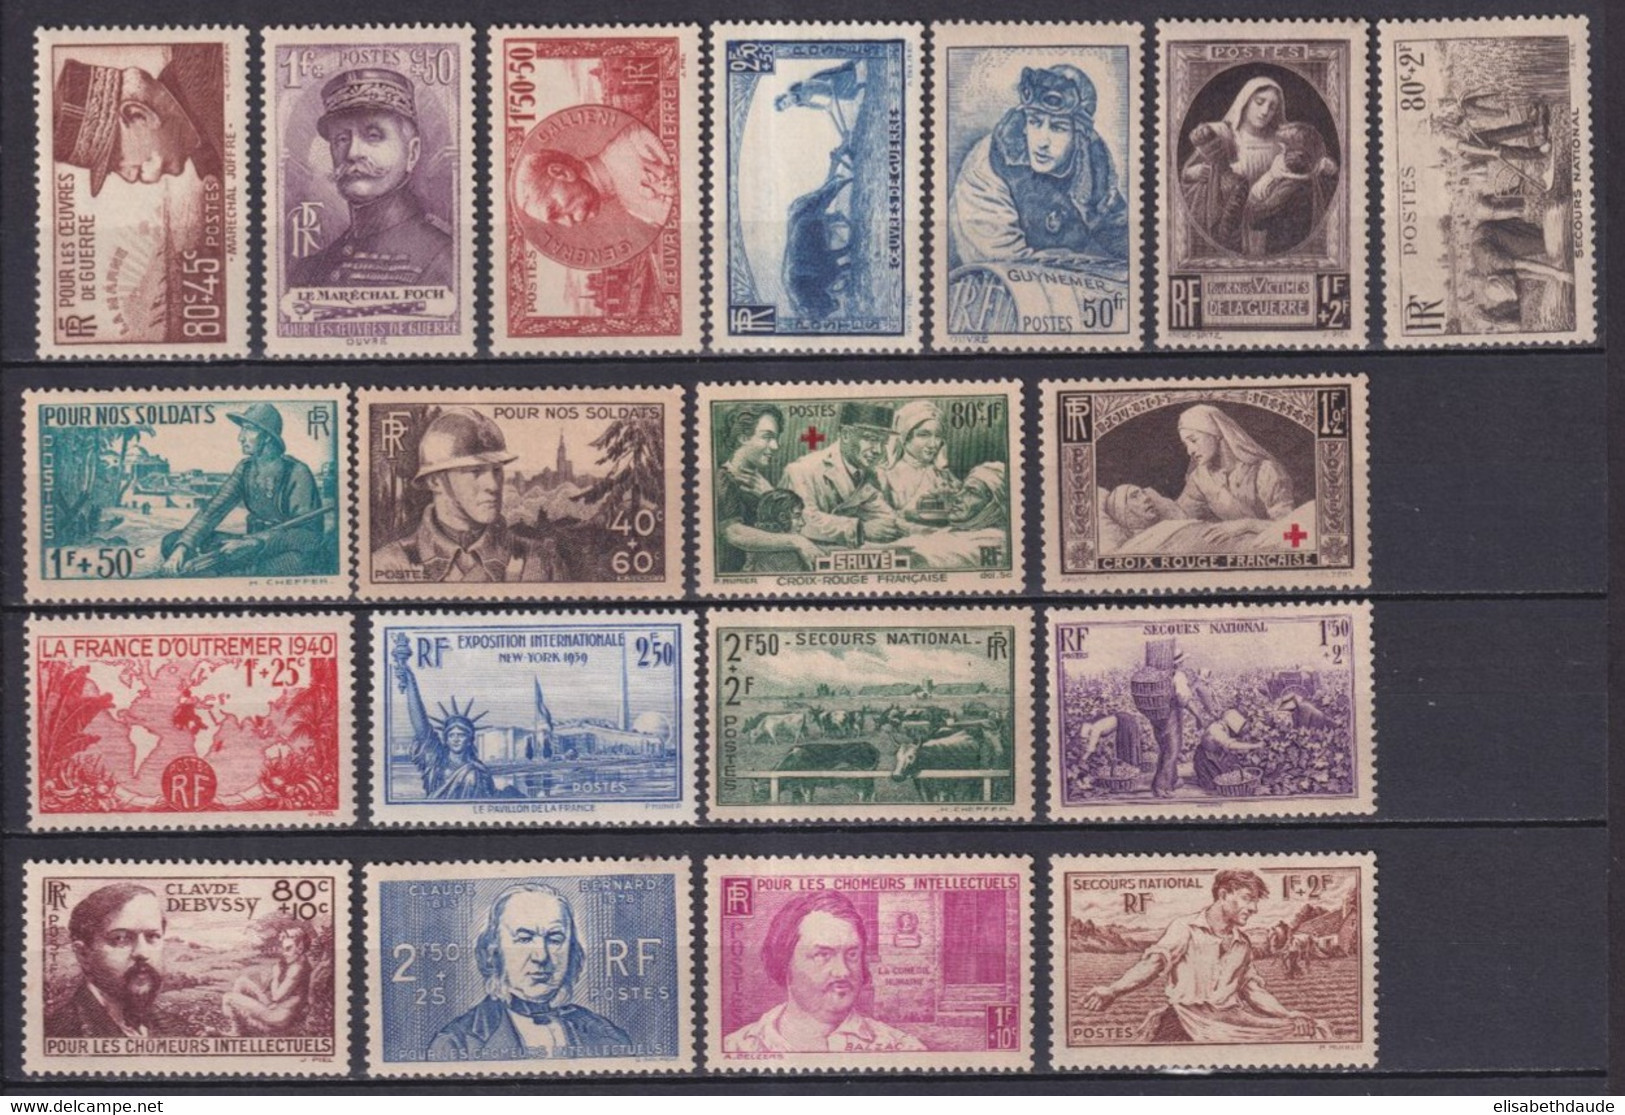 1940 - ANNEE COMPLETE YVERT N°451/469 ** MNH  - COTE = 207 EUR. - 19 TIMBRES - 1940-1949